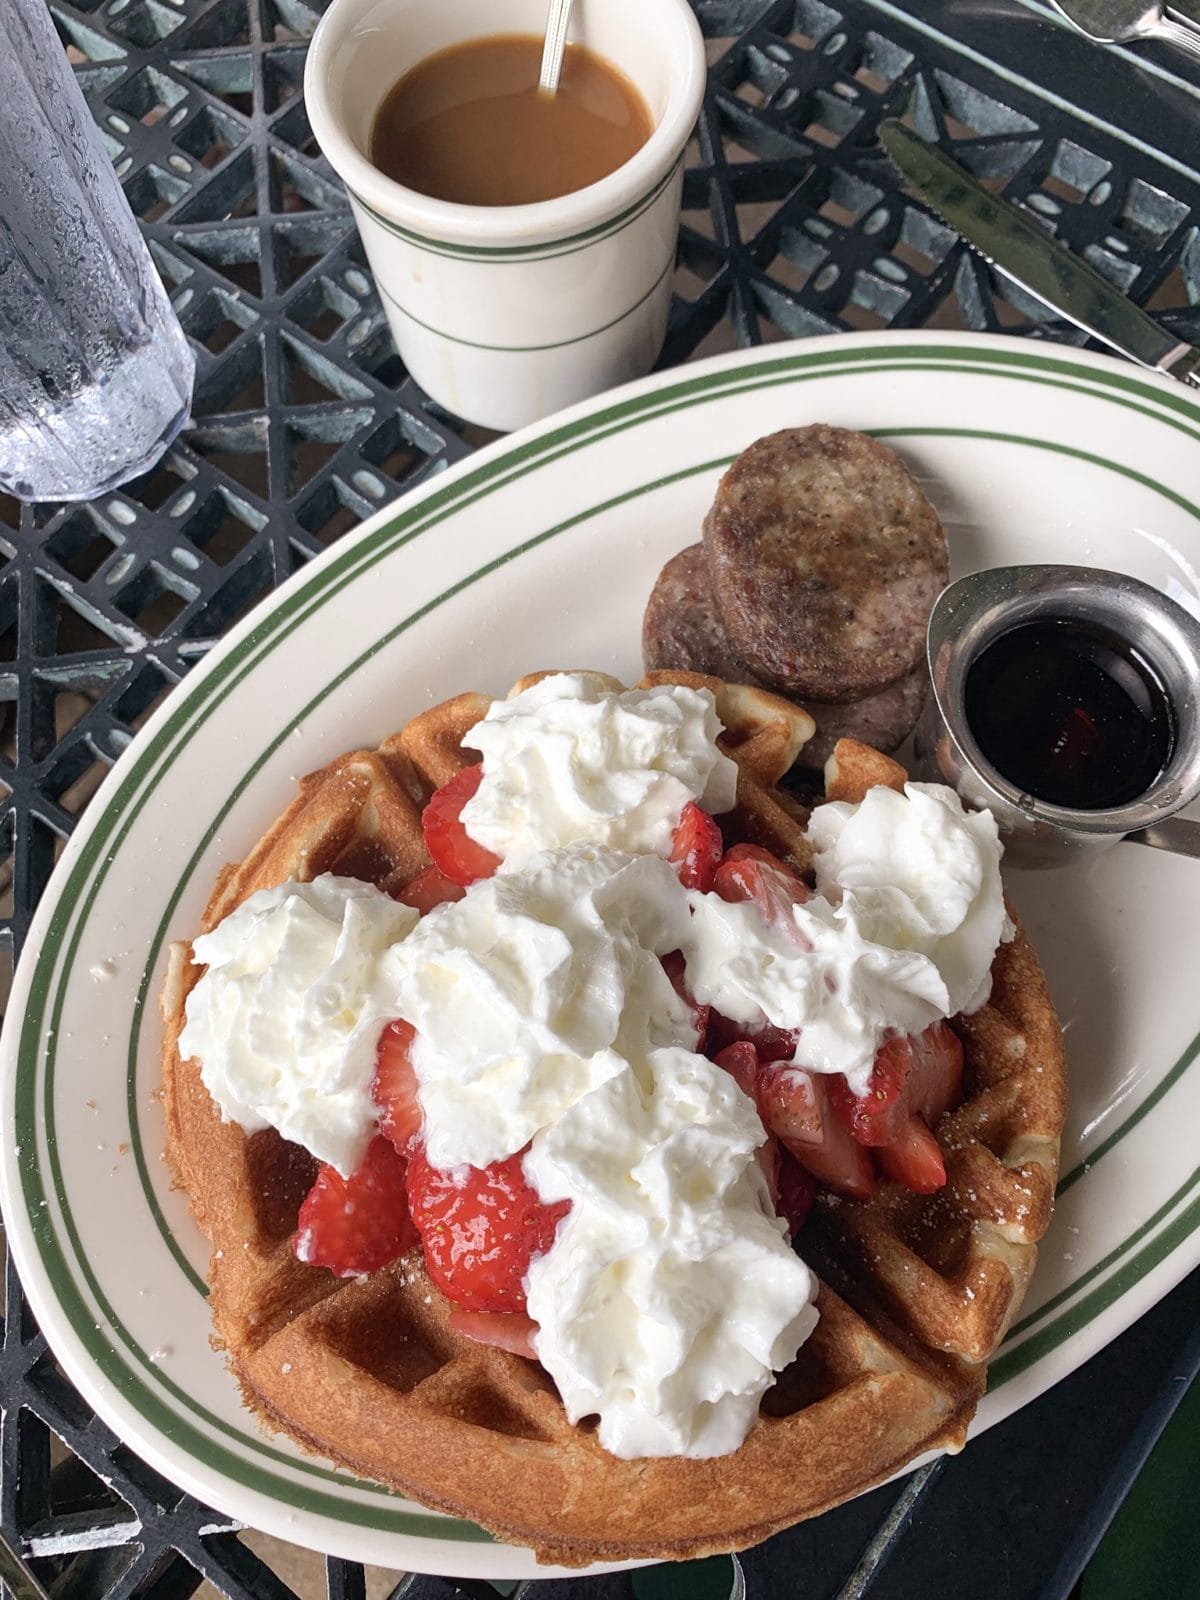 48 hours in San Antonio - waffles and coffee